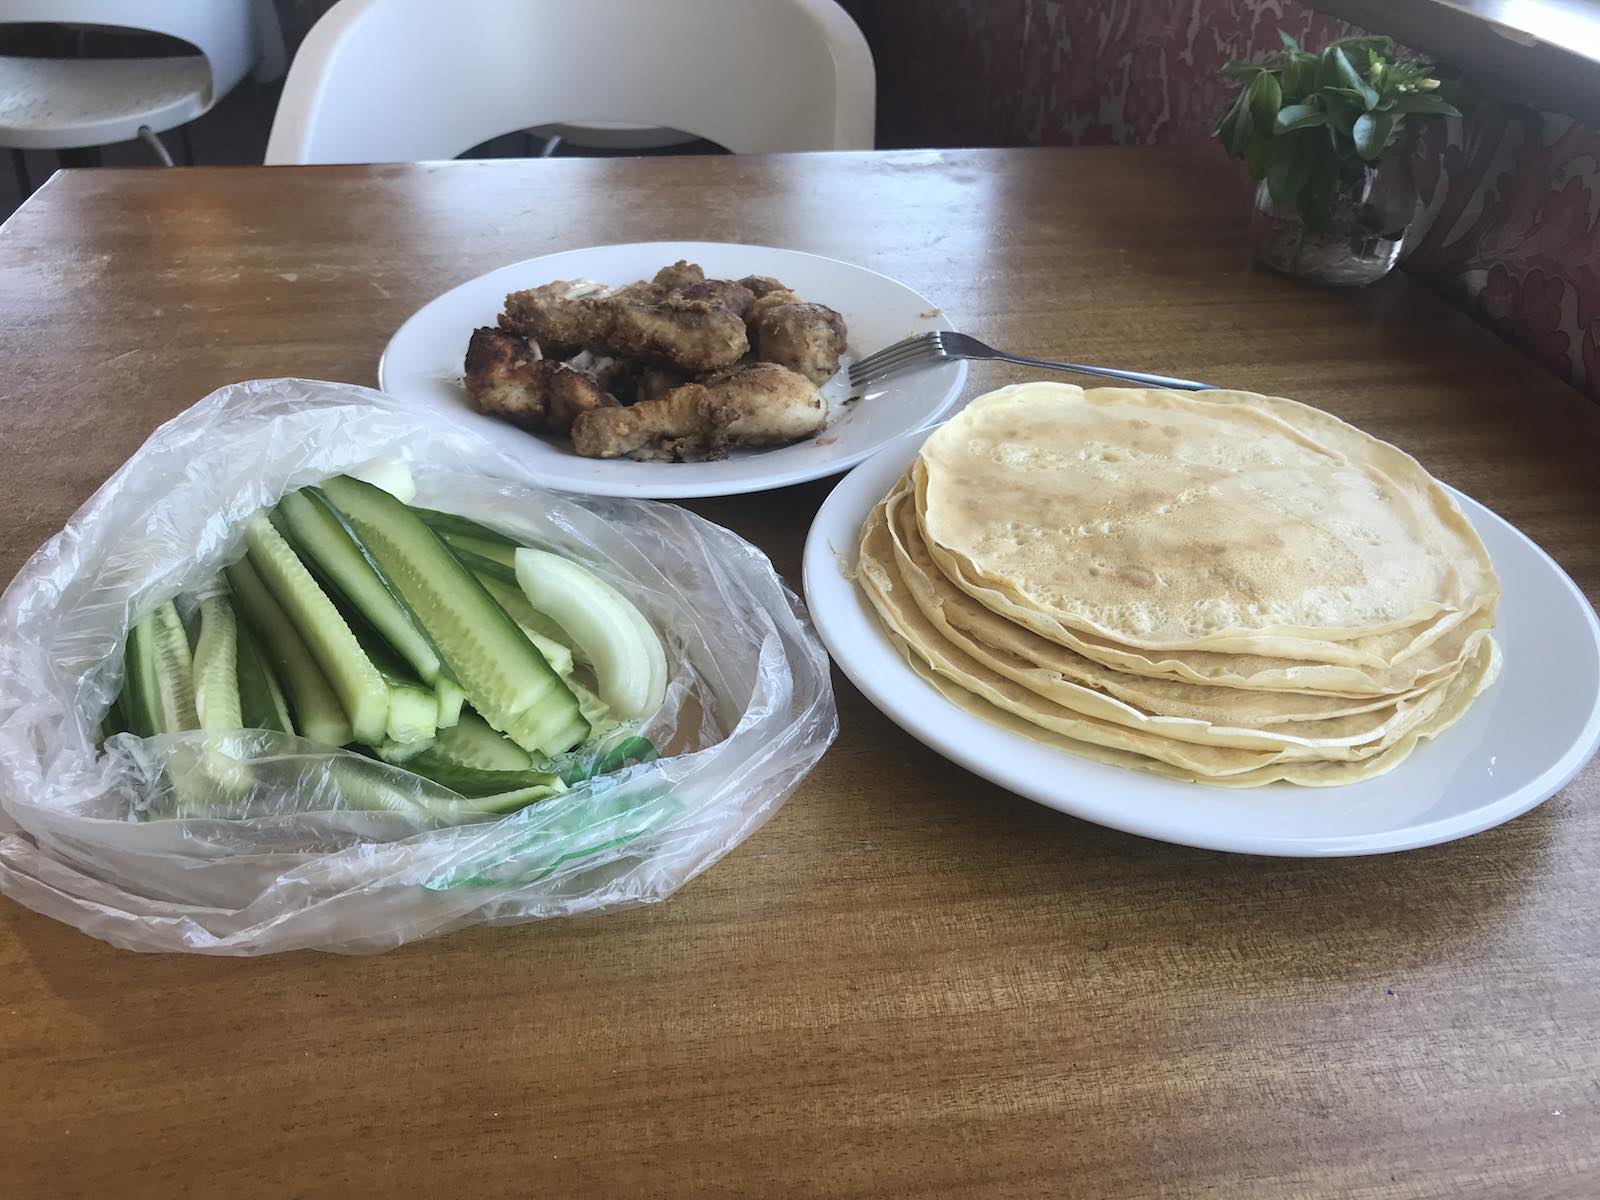 I had a lot of downtime in Wanaka, NZ due to my injured leg. I wanted something that reminded me of home and my parents used to make savory crepes with green onion/black bean sauce inside. Improvised a bit with what I had by frying some chicken and chopping some cucumber/onions and came up with these.